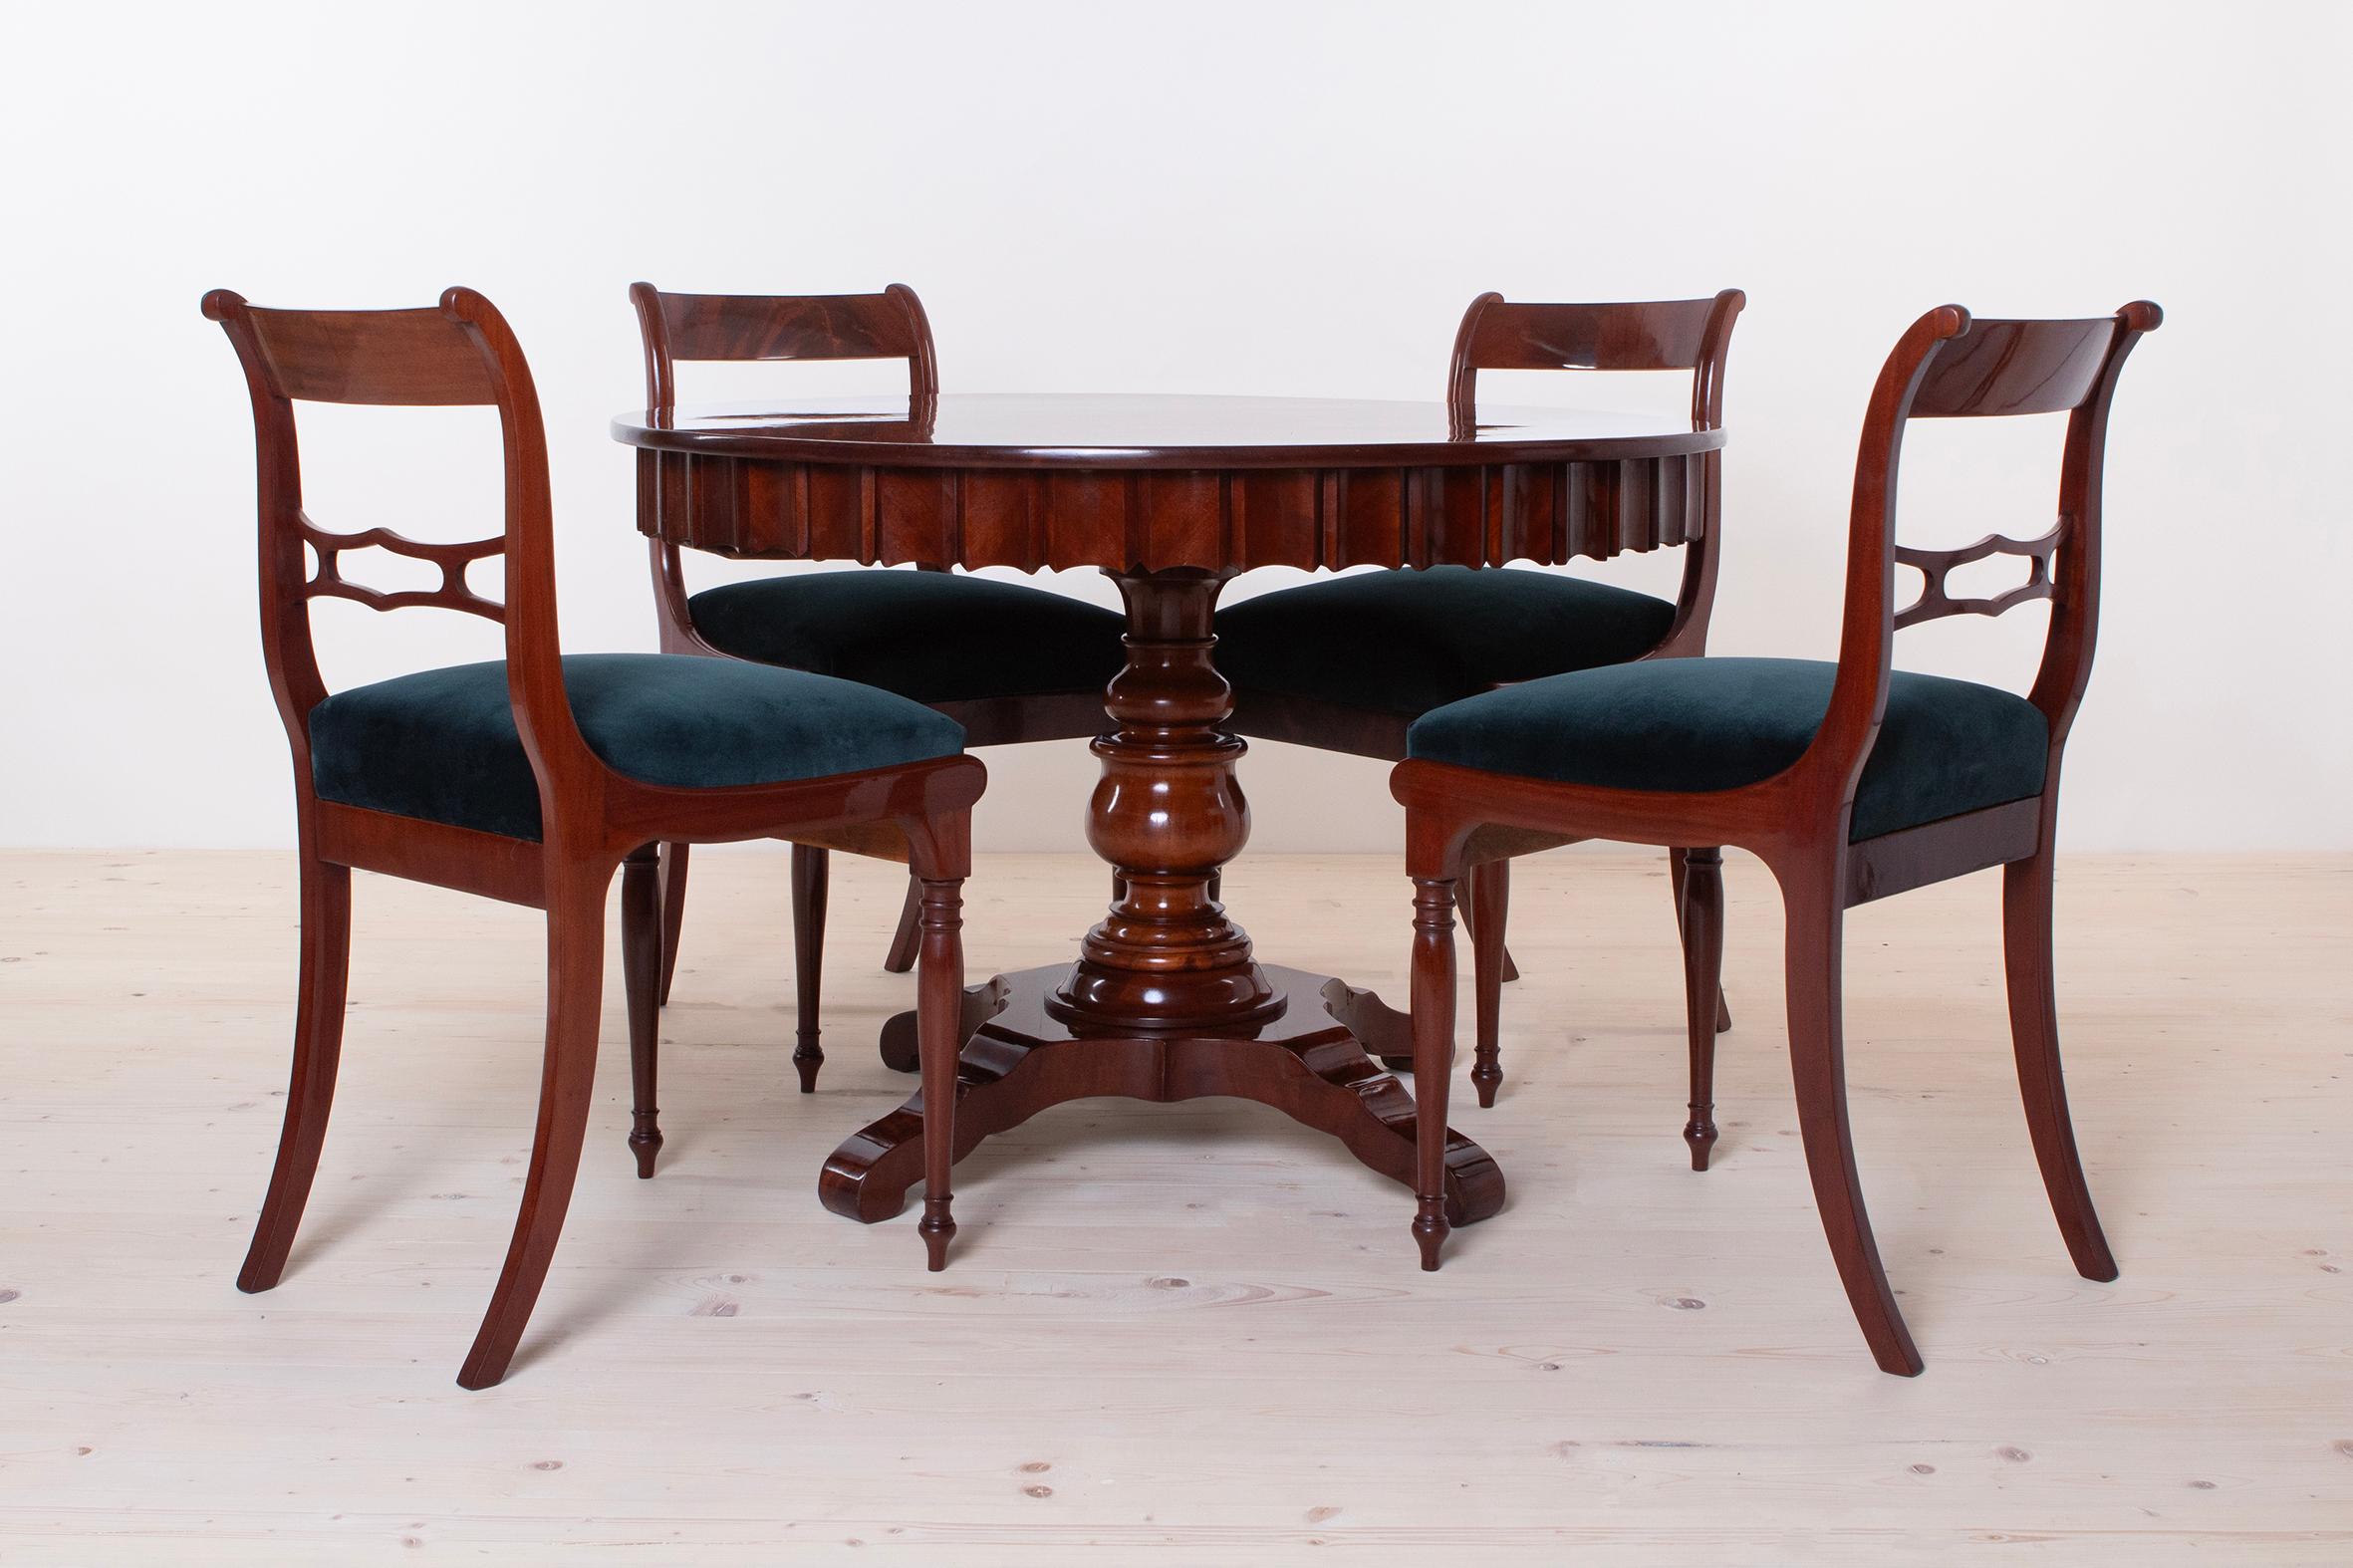 This beautiful dining set was made in Austria in 19th Century. It consists of 4 chairs and round table. It is made of mahogany wood and the chairs backrests are veneered with mahogany as well. The whole set was carefully restored. All wooden